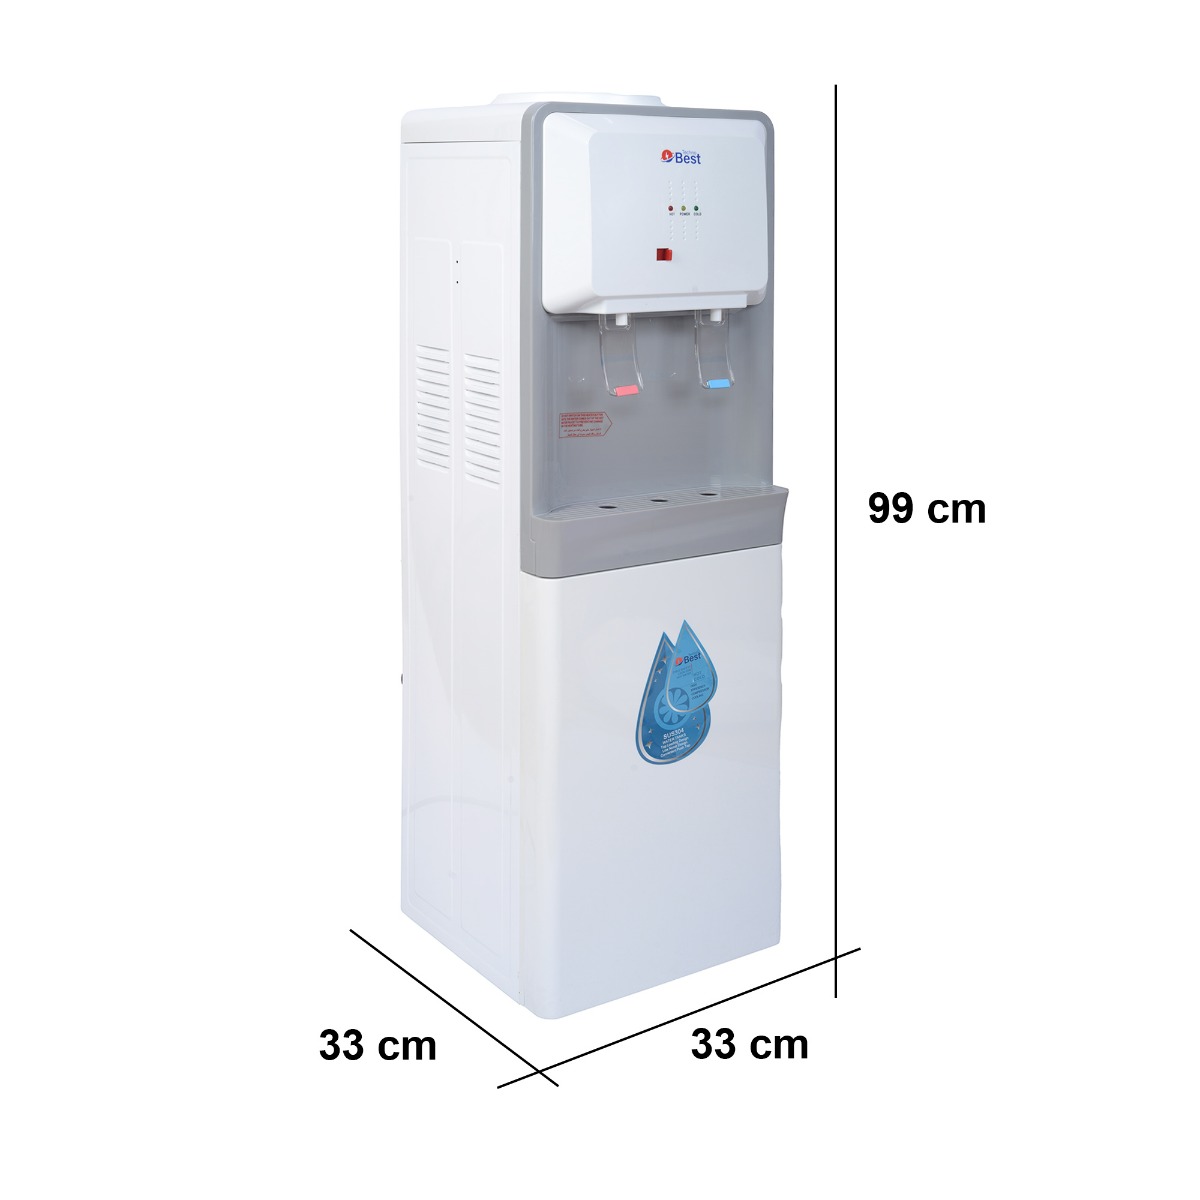 Best Water Dispenser 2 Tap, Hot/ Cold, Stand, White - BWD-001